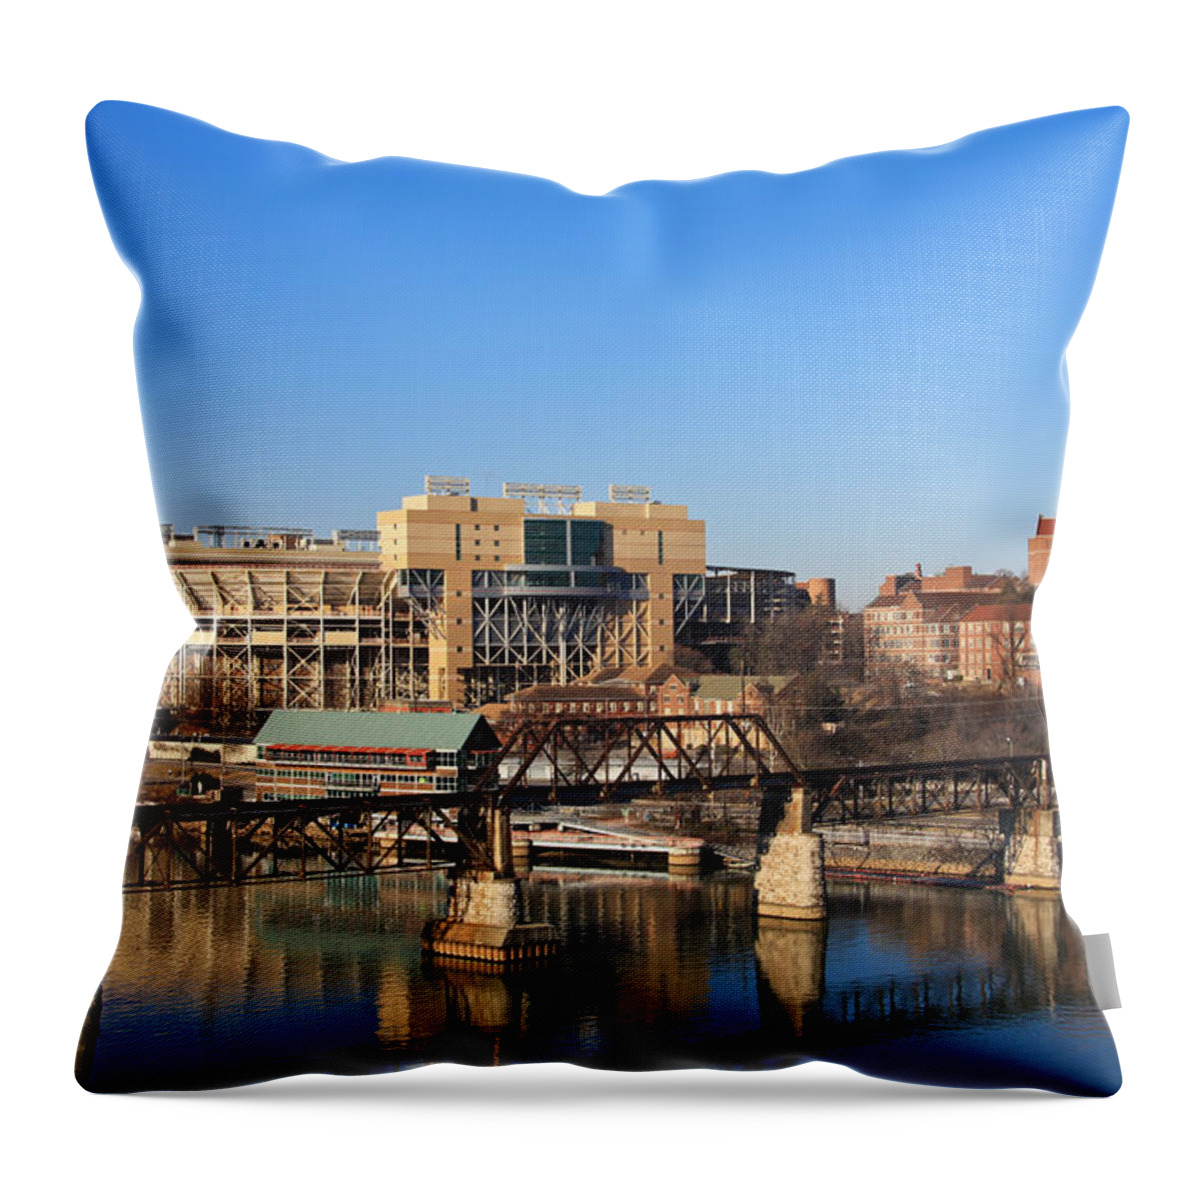 Neyland Stadium Throw Pillow featuring the photograph University of Tennessee by Melinda Fawver